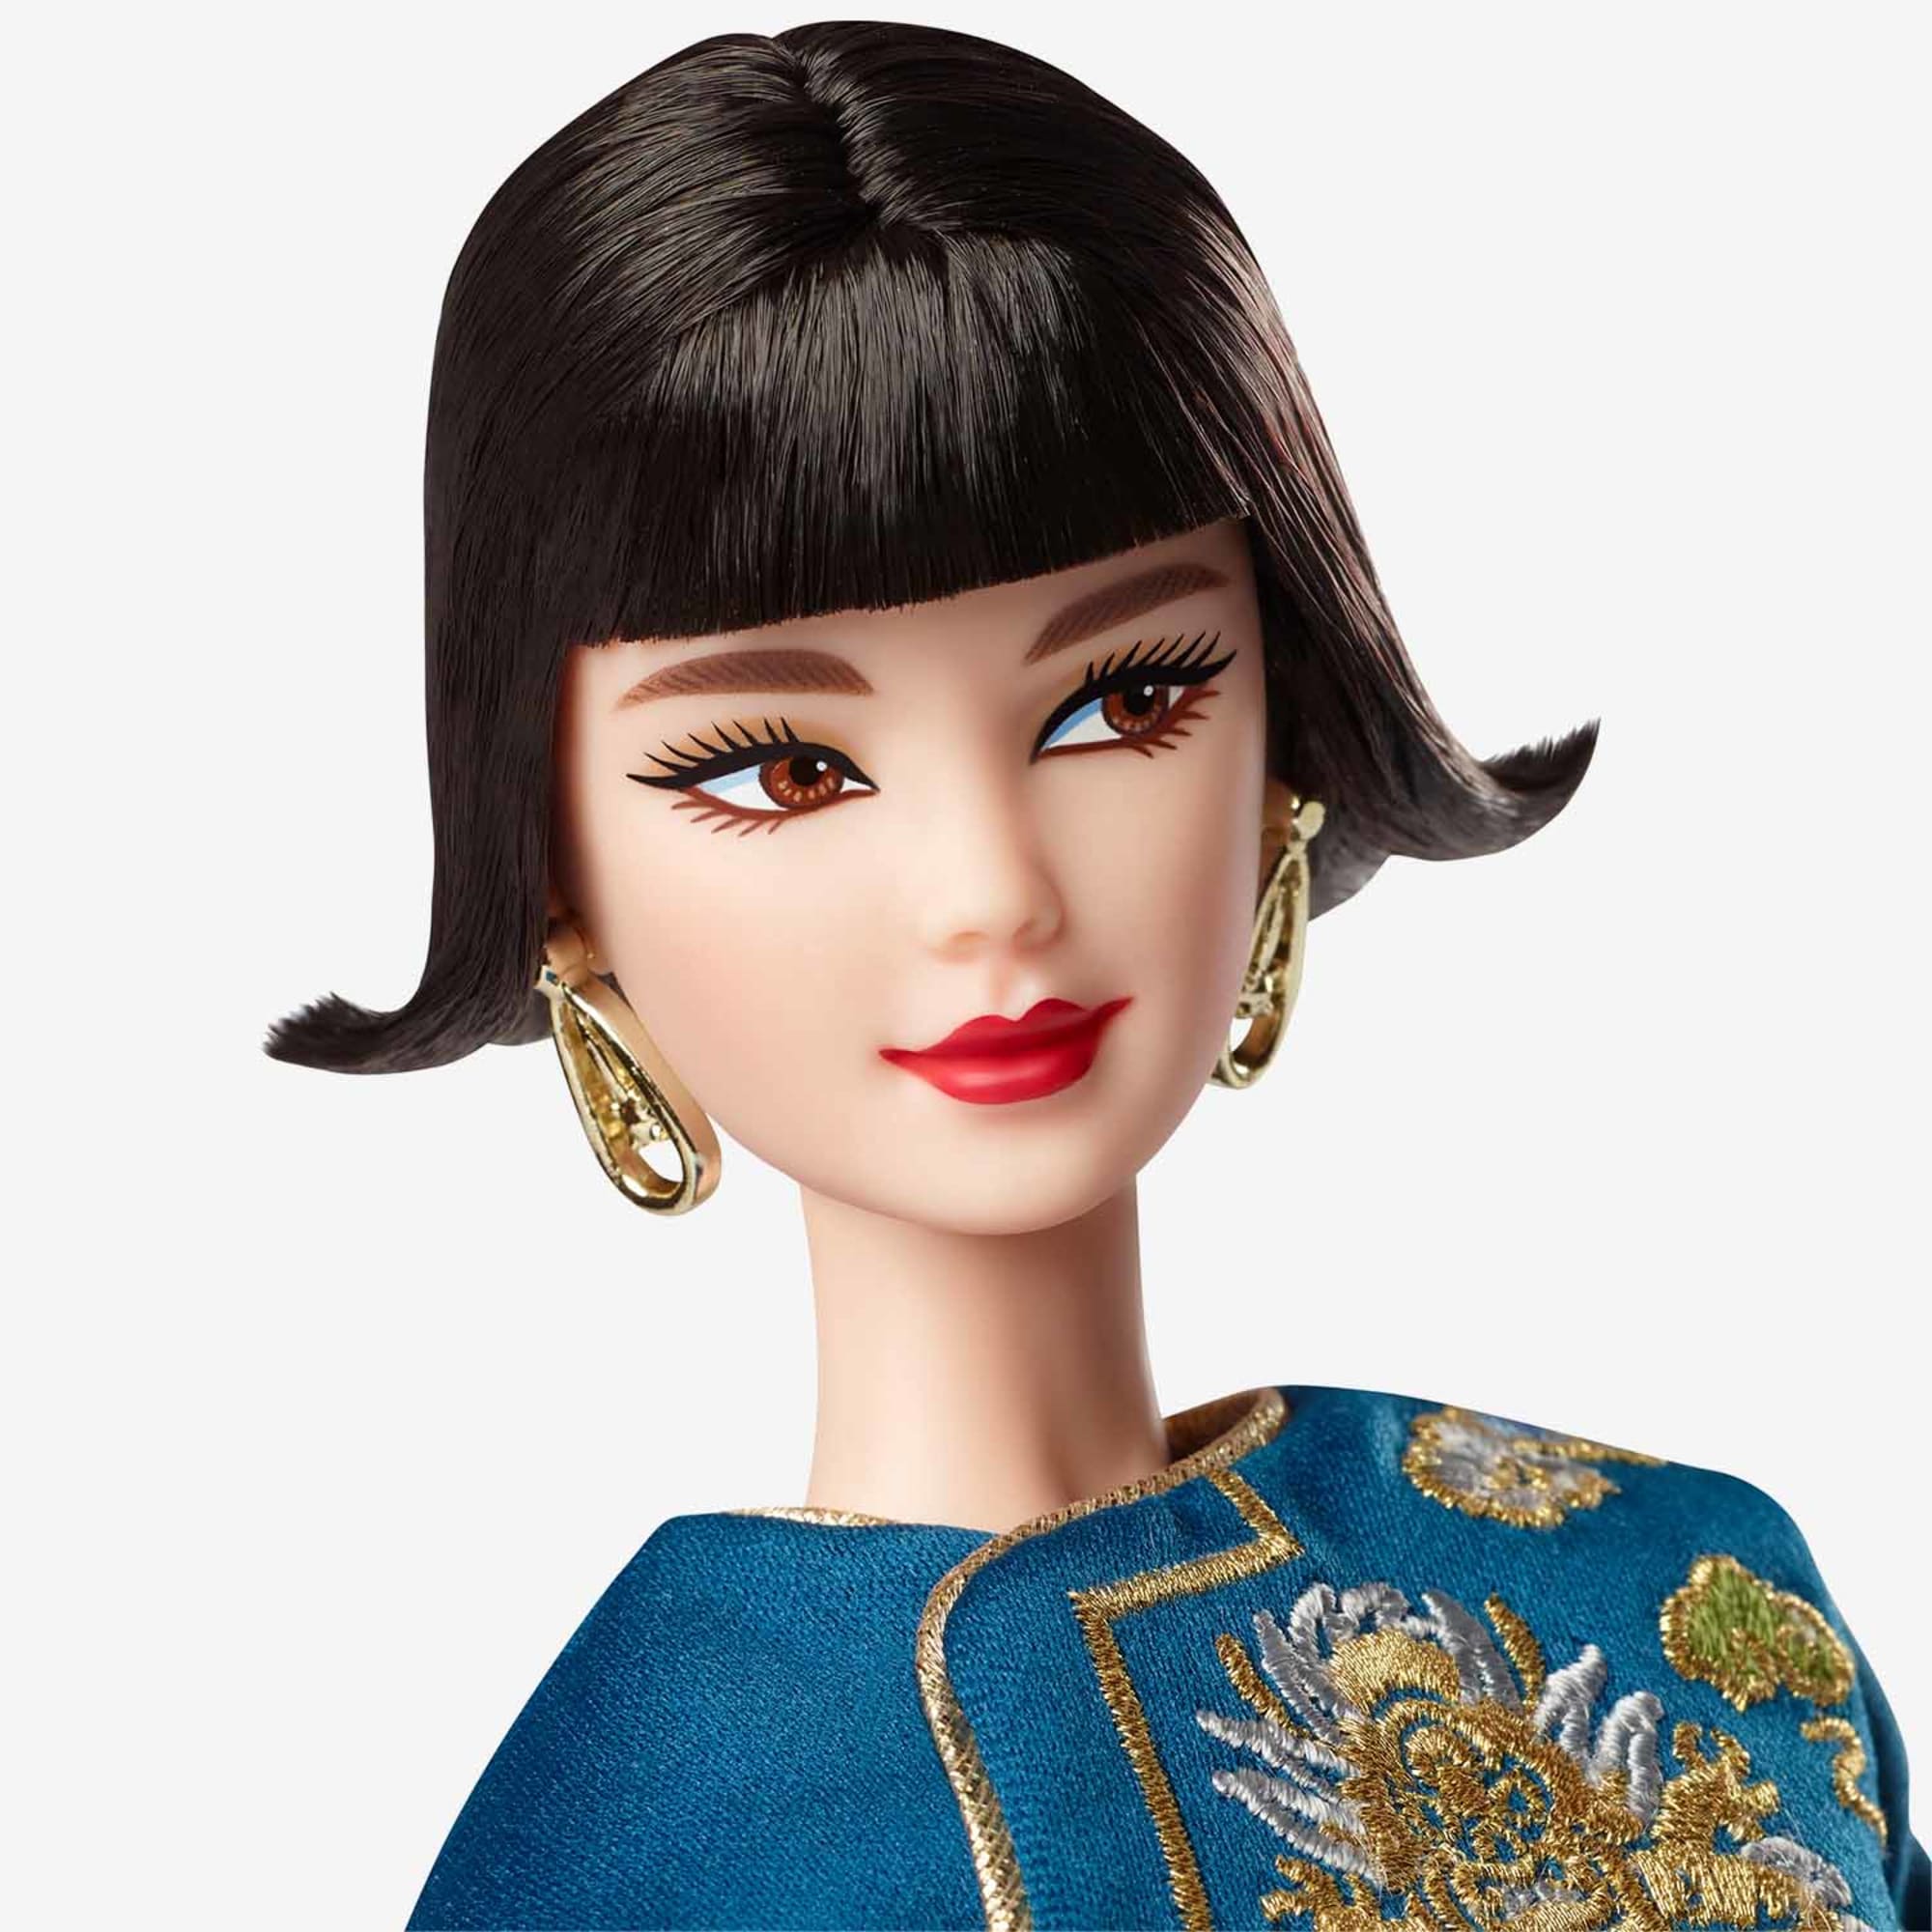 2023 Barbie Lunar New Year Doll Designed By Guo Pei – Mattel Creations